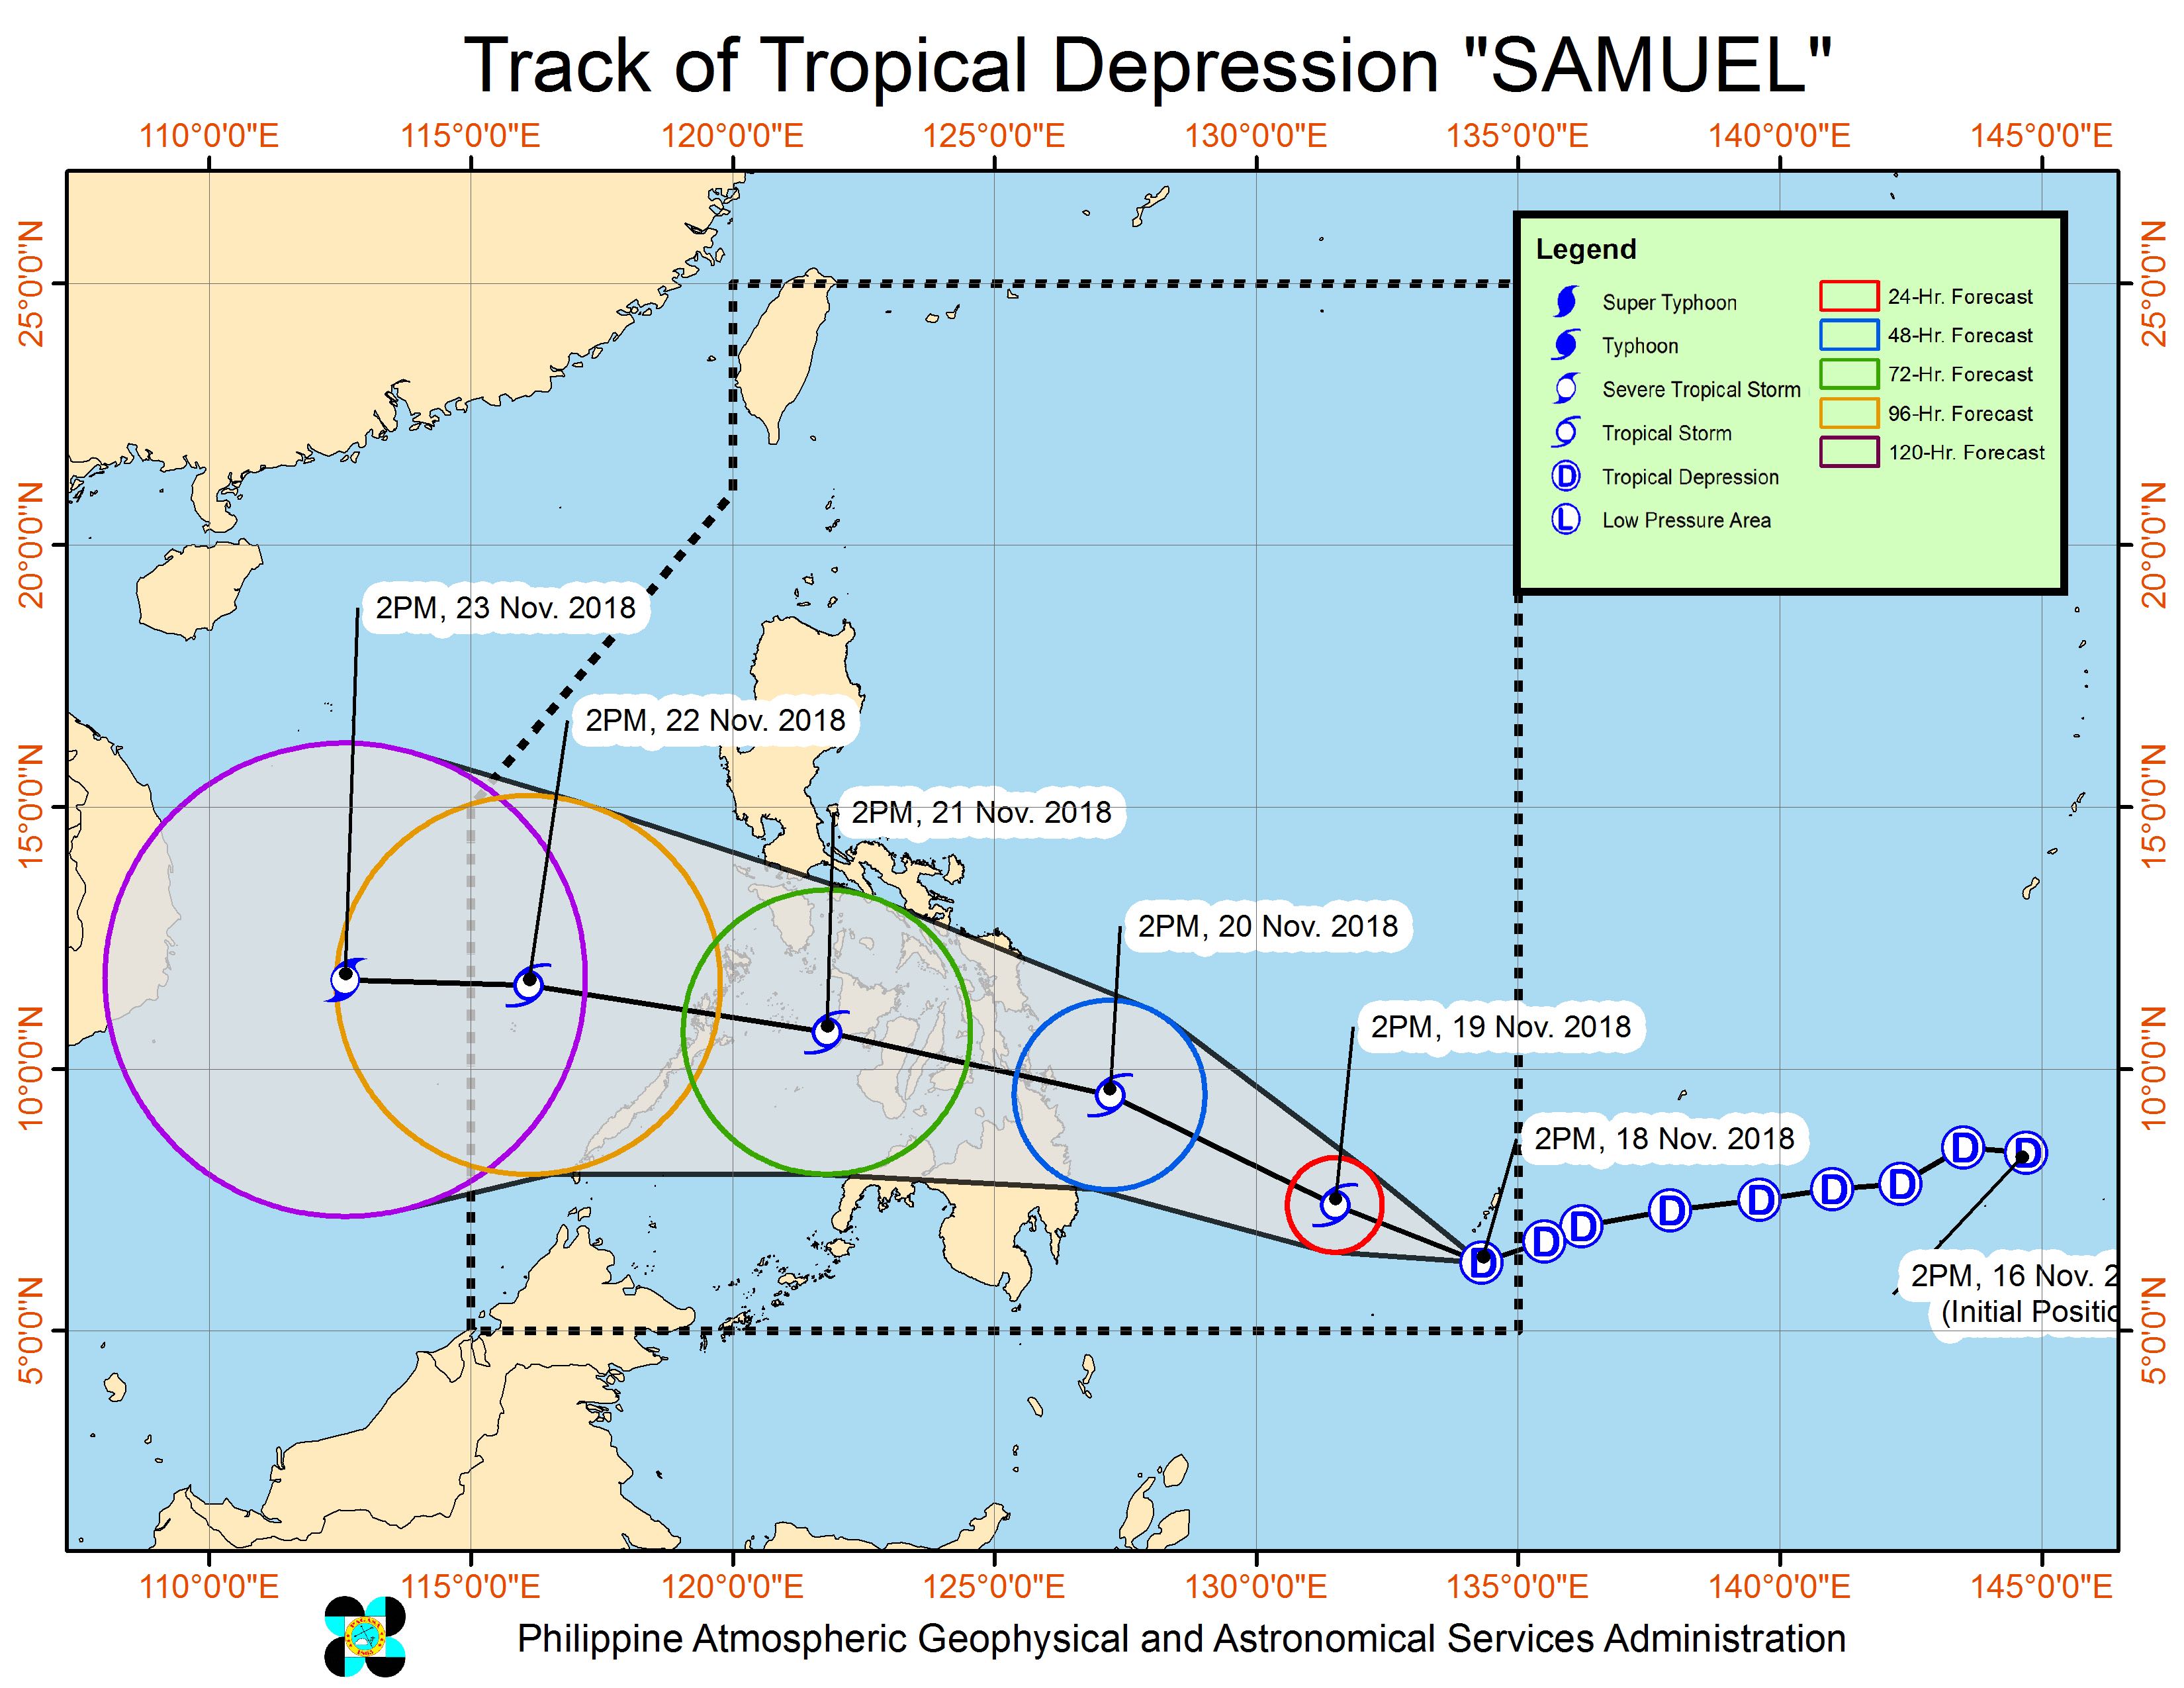 Forecast track of Tropical Depression Samuel as of November 18, 2018, 5 pm. Image from PAGASA 